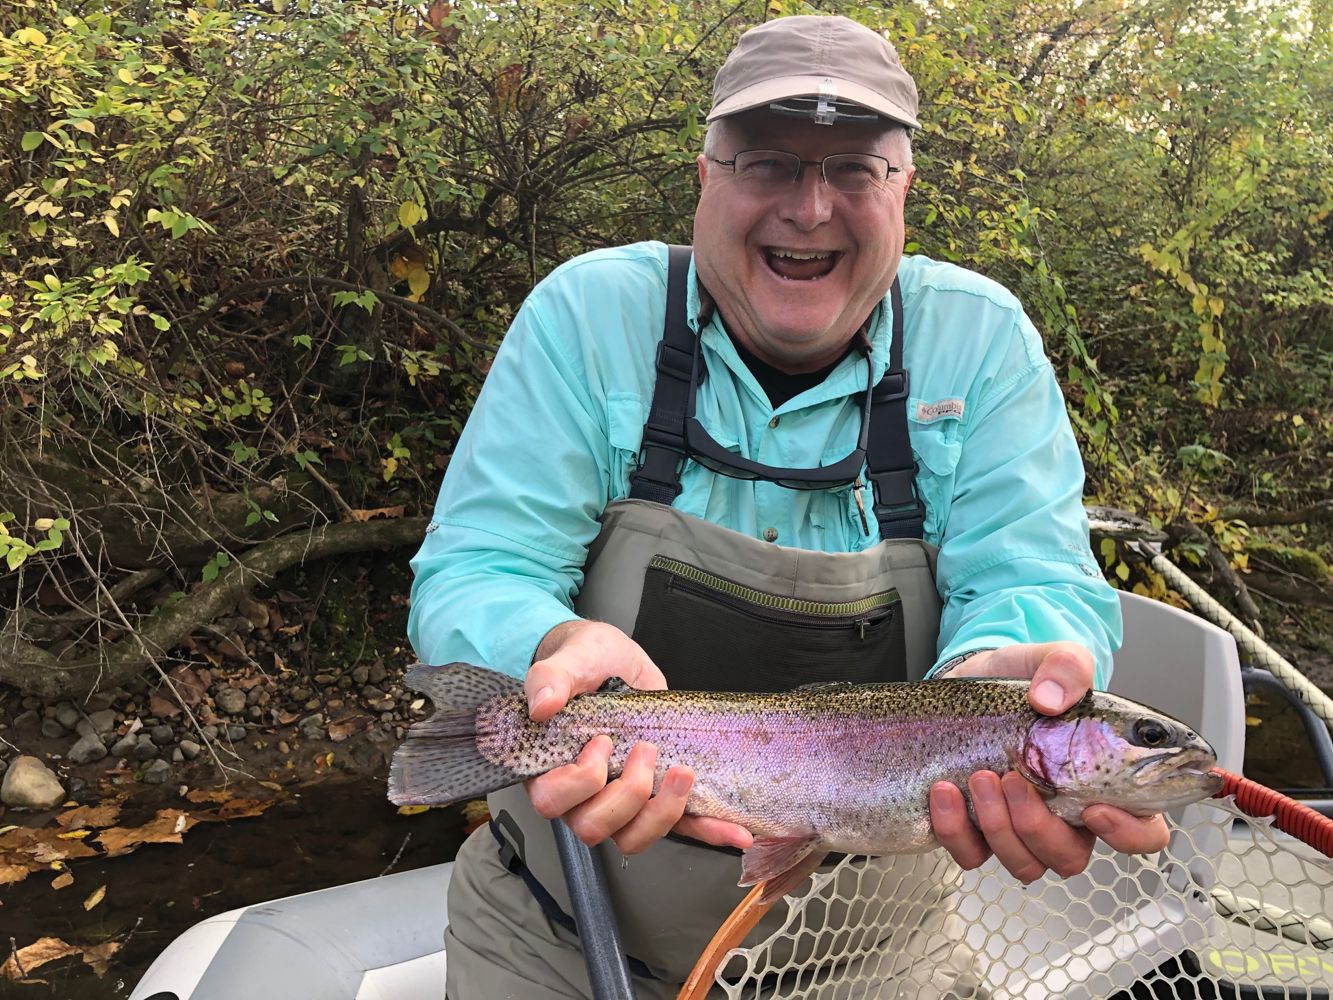 Rainbow Trout make you smile!